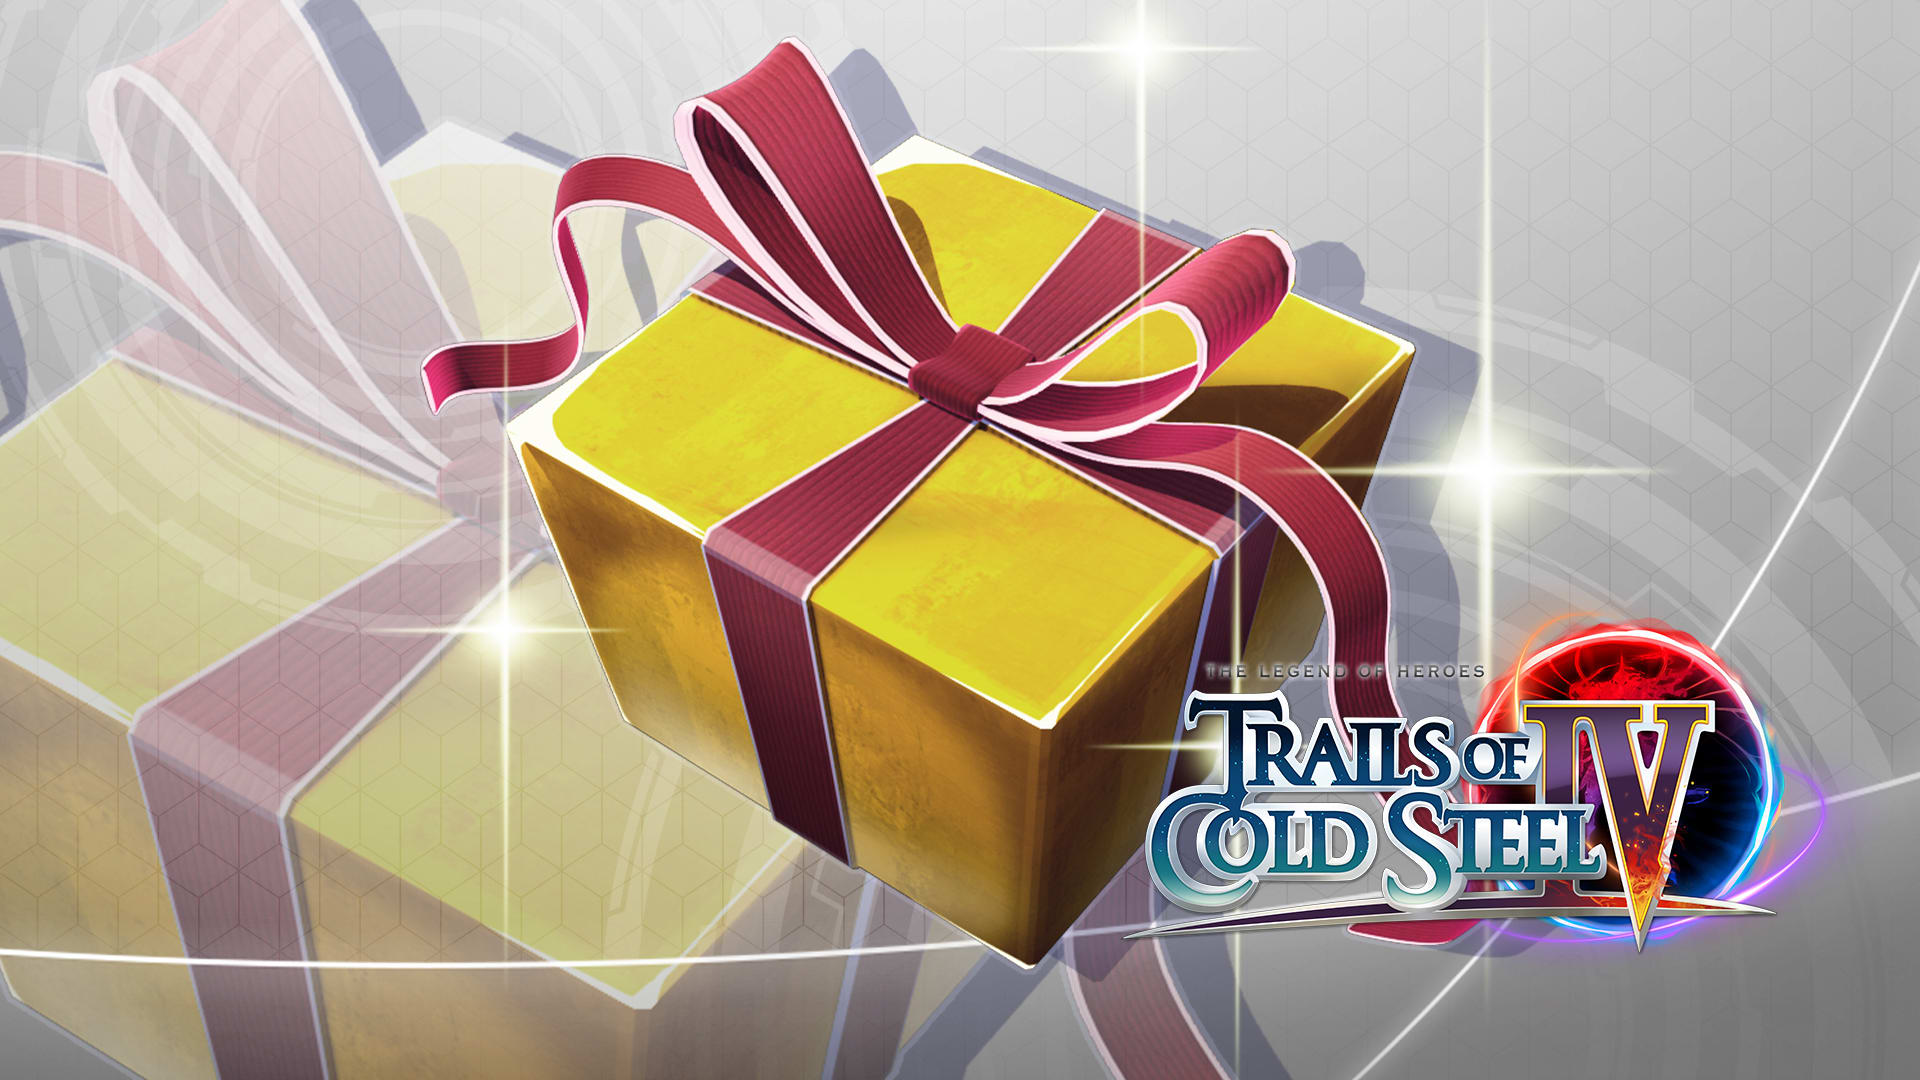 Trails of Cold Steel IV: Gifts from Eryn